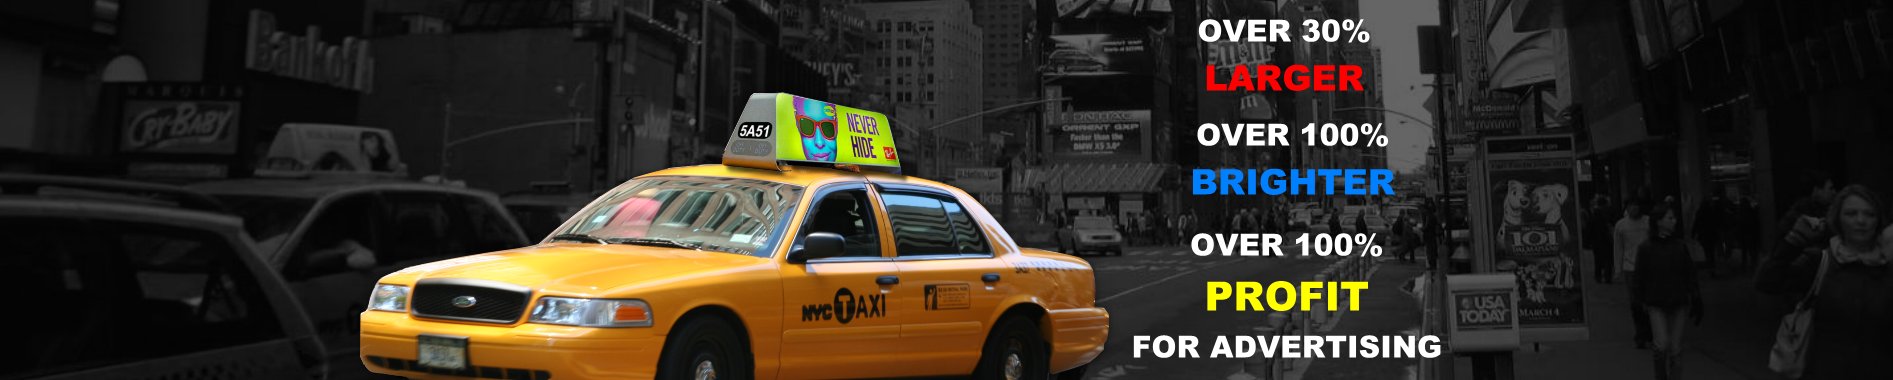 LED Taxi Display For Your Advertisement